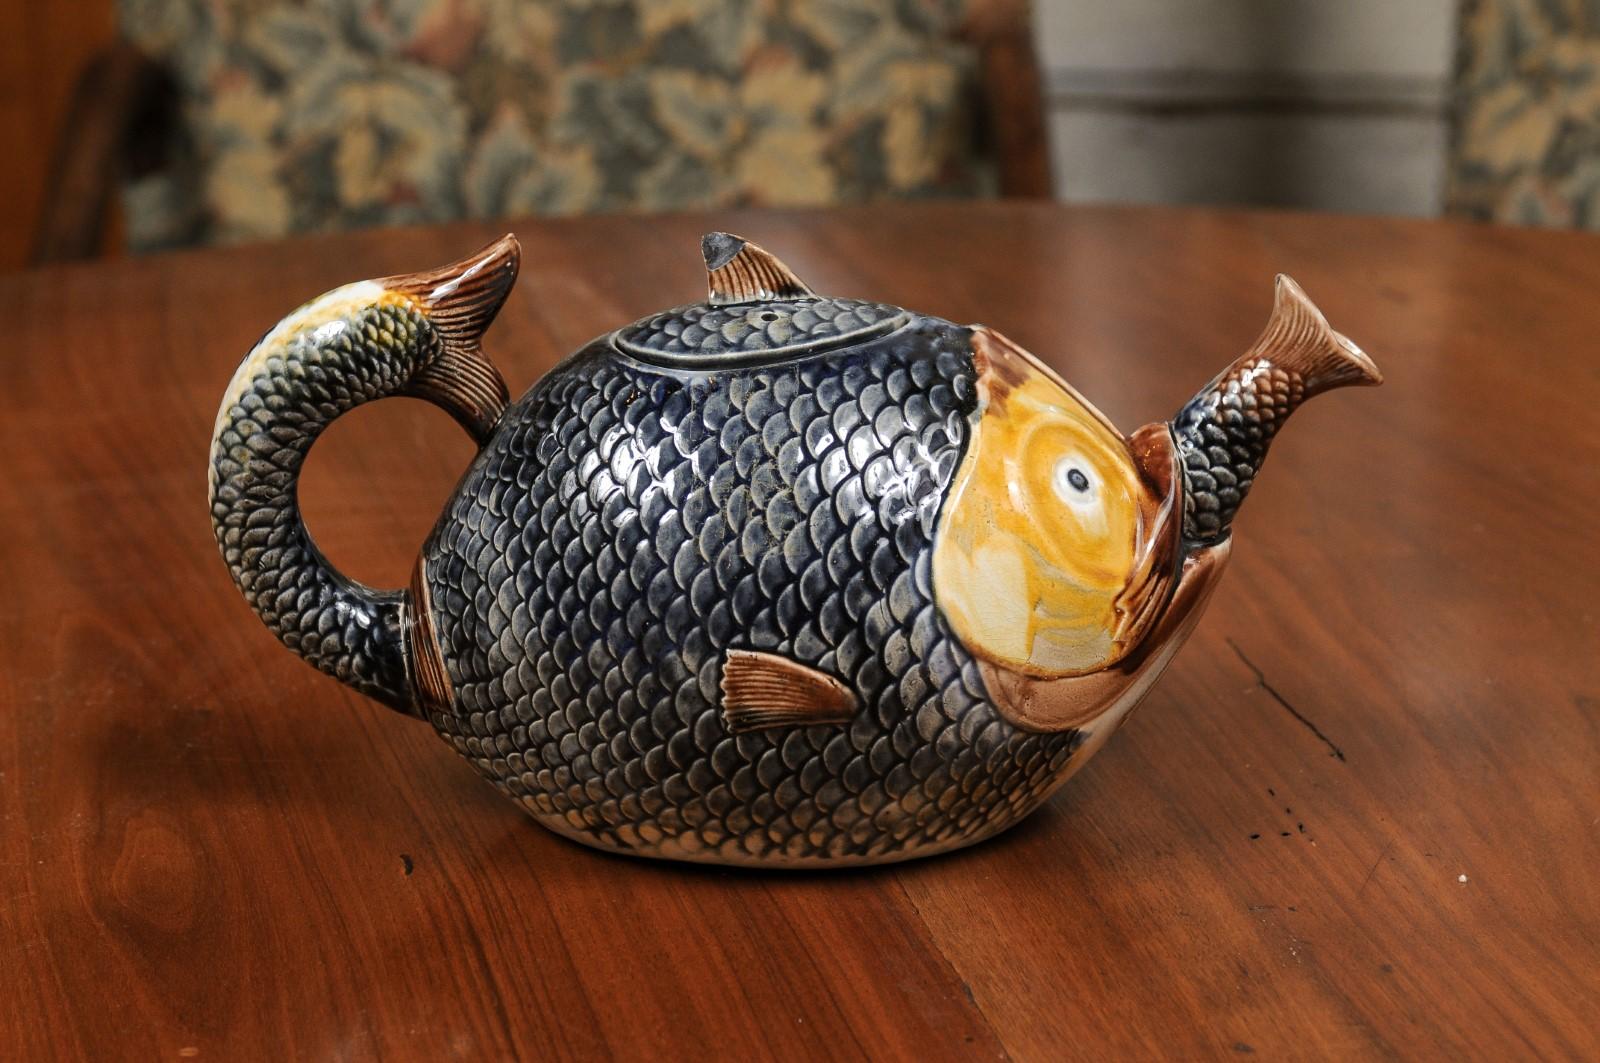 French 1885s Glazed Majolica Teapot Depicting a Fish Eating Another Fish 3